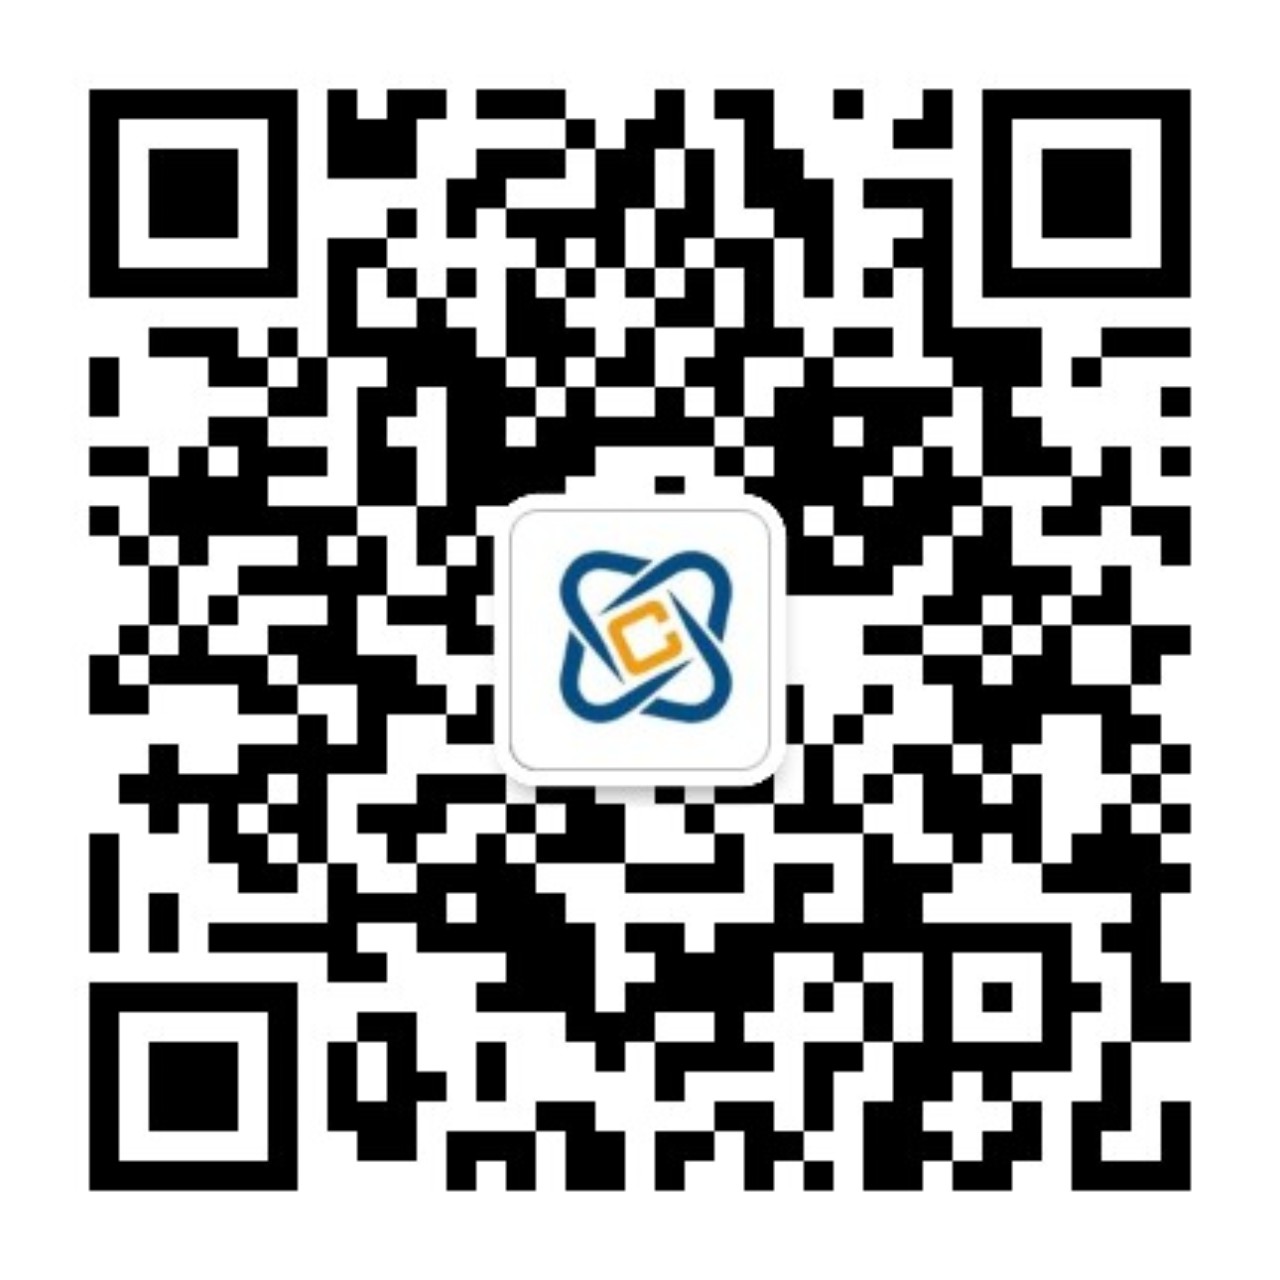 footer_qrcode_n